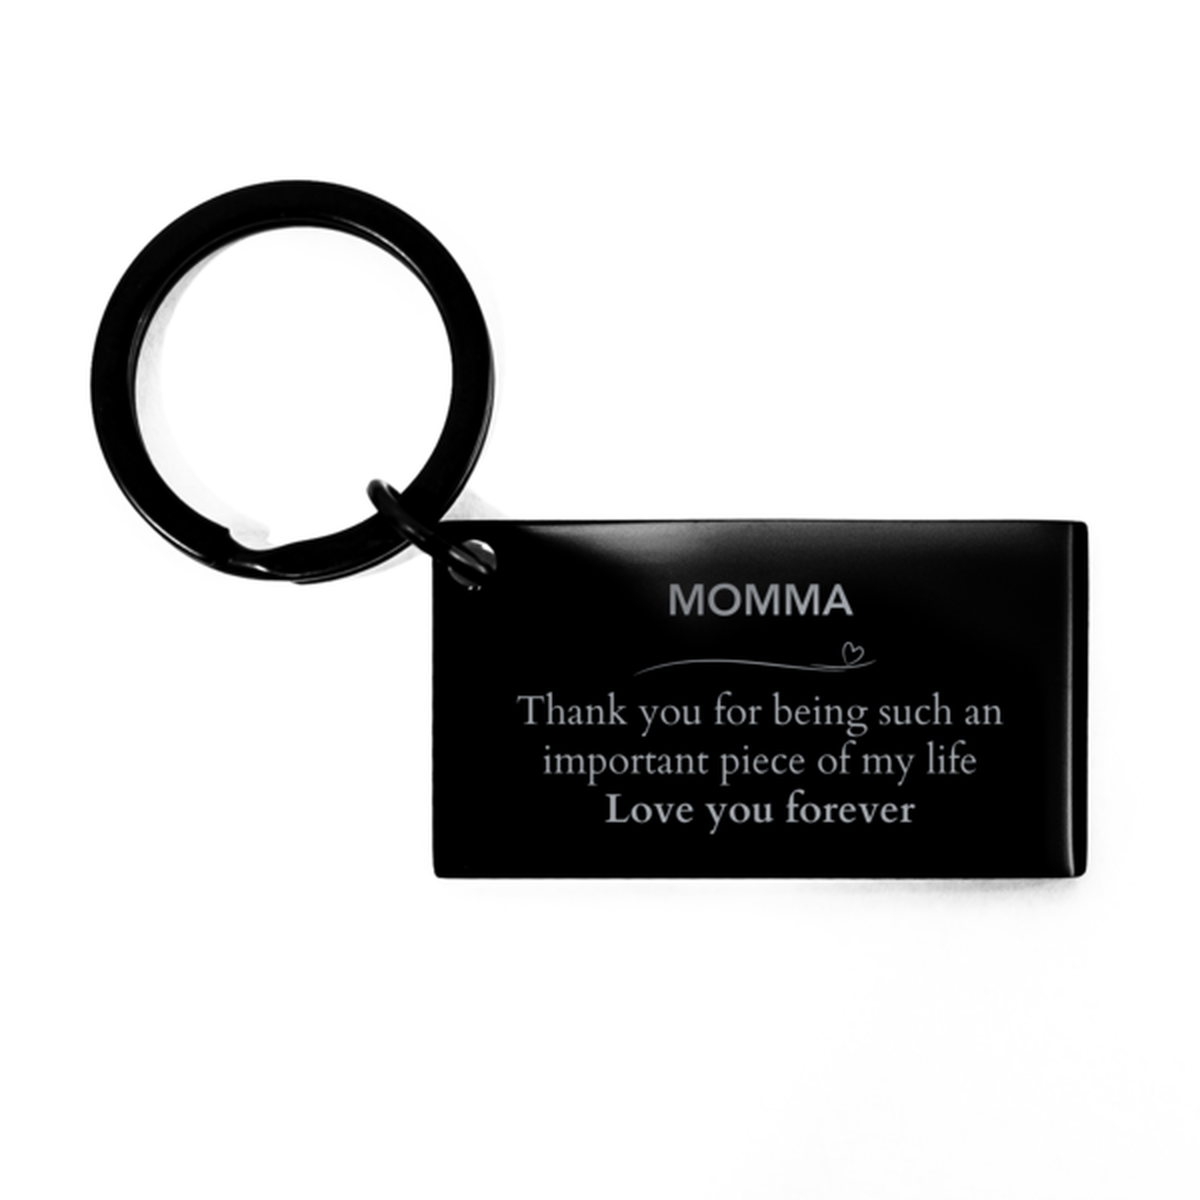 Appropriate Momma Keychain Epic Birthday Gifts for Momma Thank you for being such an important piece of my life Momma Christmas Mothers Fathers Day